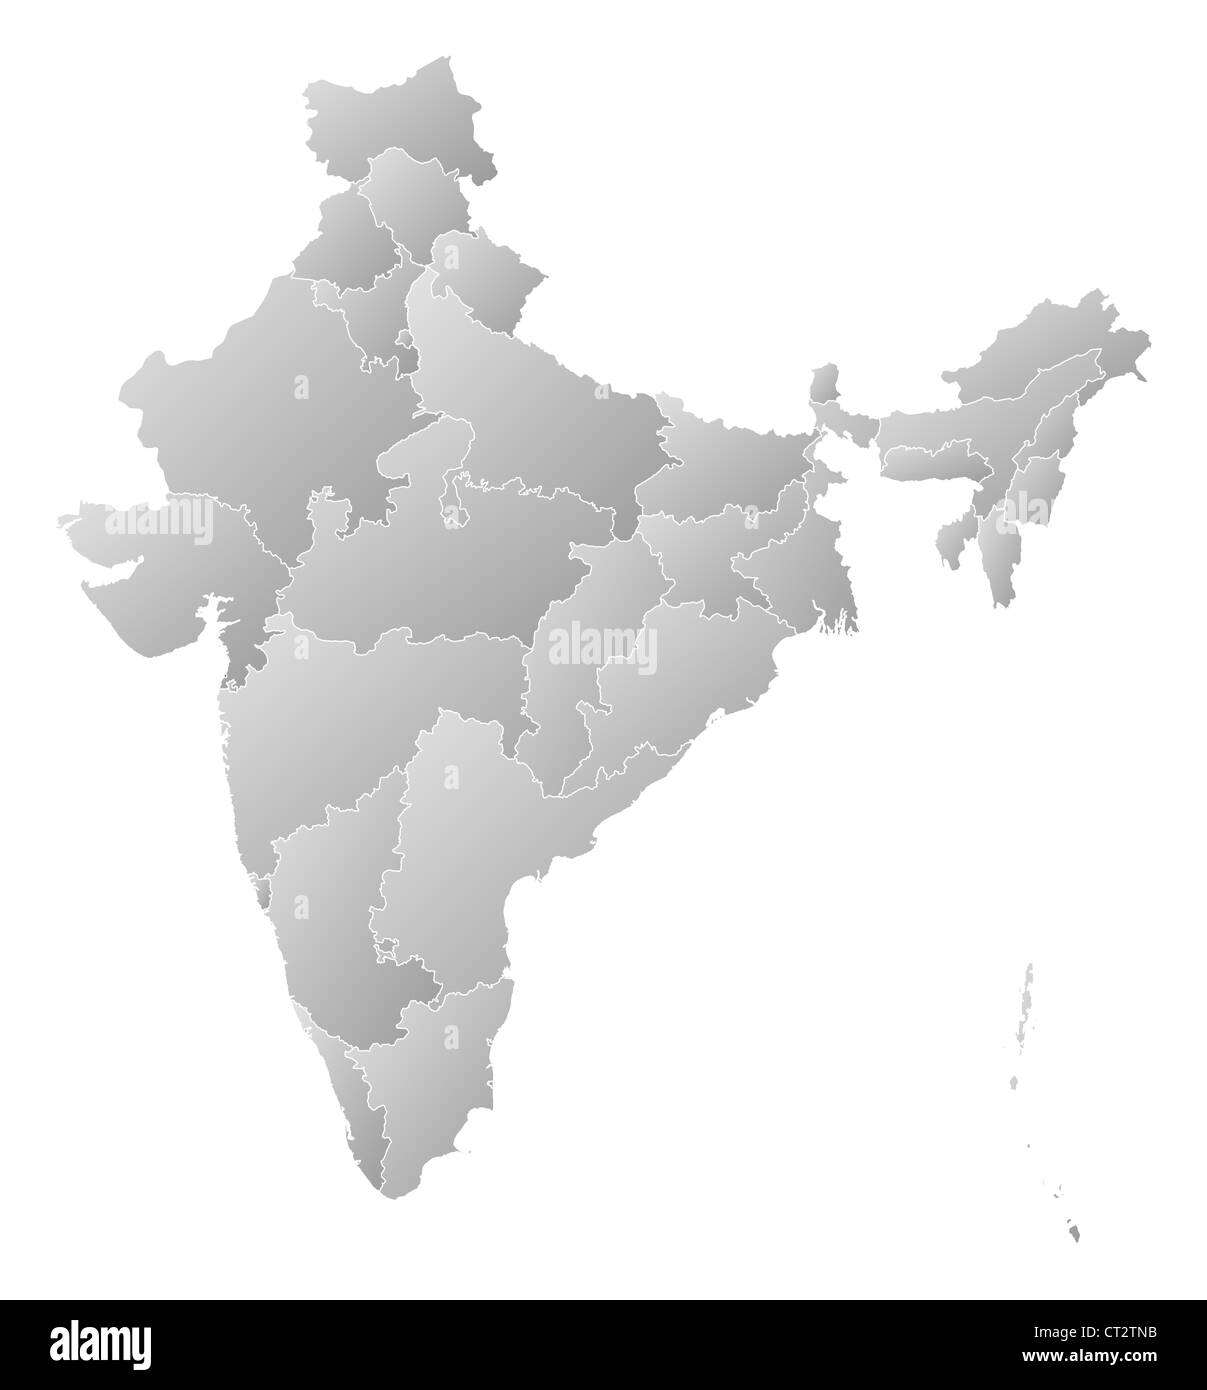 Political map of India with the several states where Daman and Diu are highlighted. Stock Photo